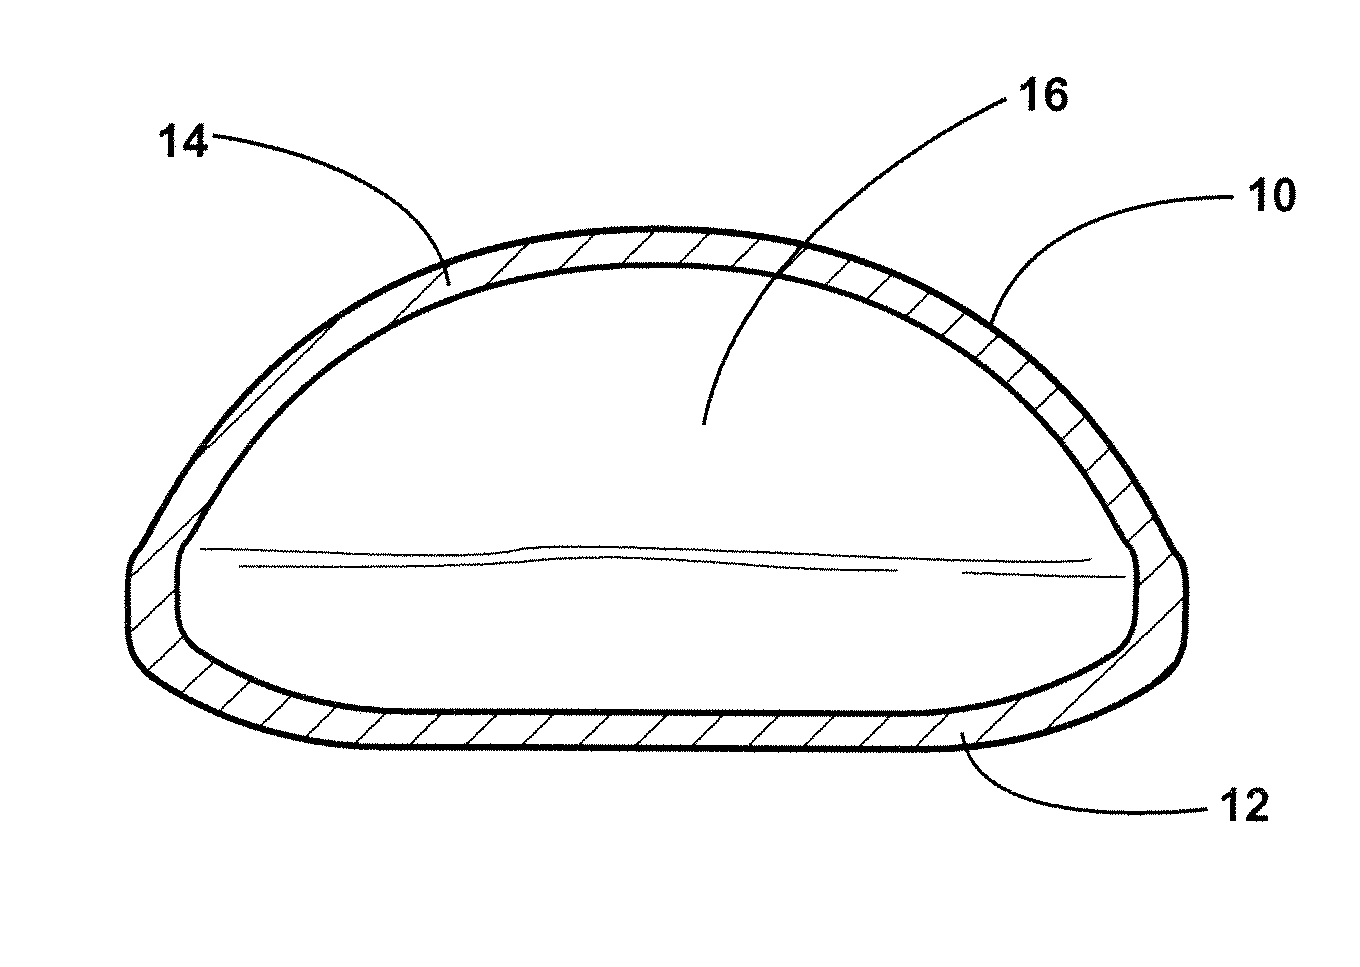 Puffed Cracker-Like Food Products And Method Of Making